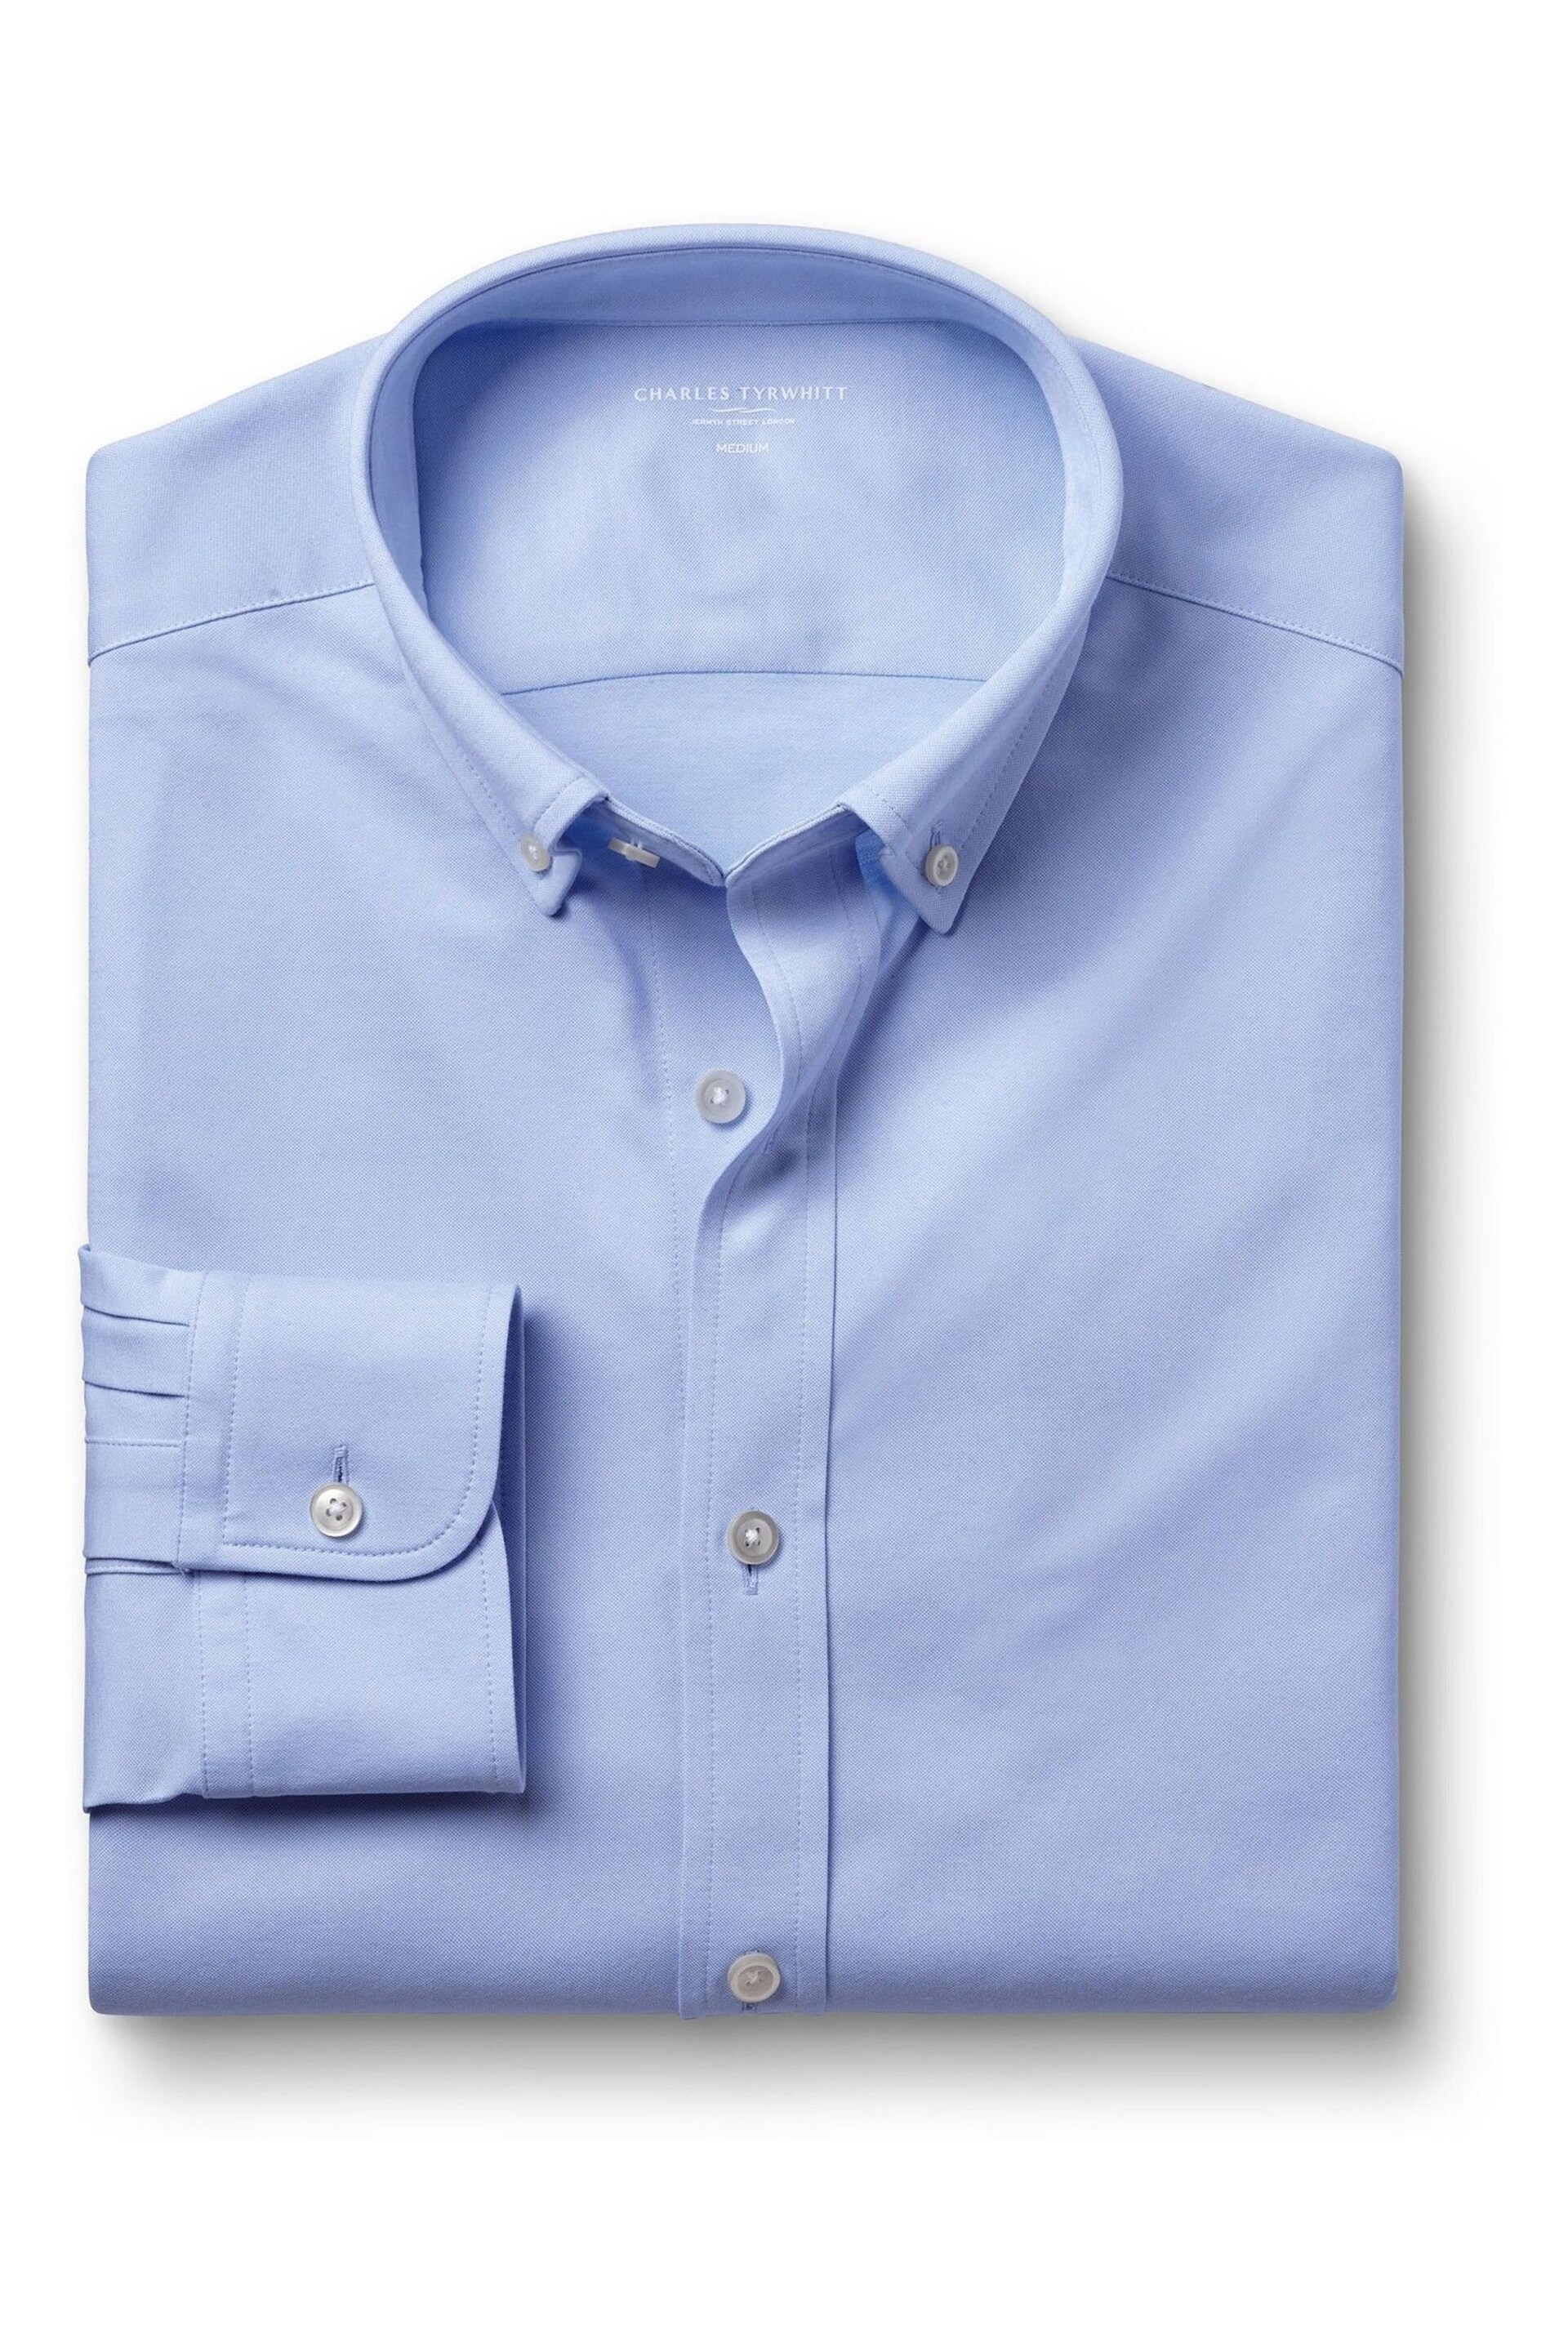 Charles Tyrwhitt Blue Four Way Stretch Button Down Jersey Shirt - Image 4 of 5